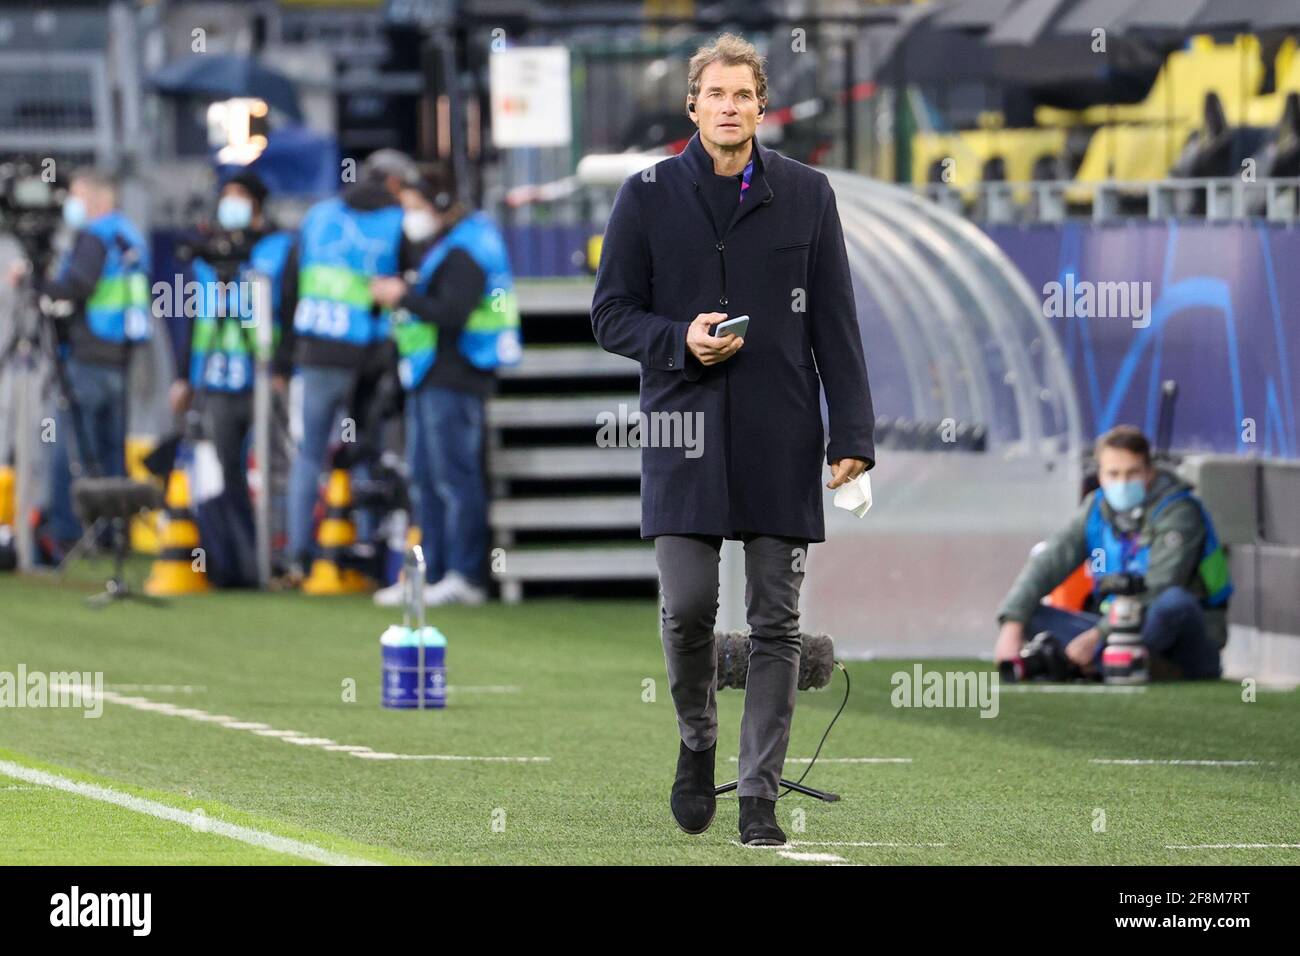 DORTMUND, GERMANY - APRIL 14: Jens Lehmann during the UEFA Champions League Quarter Final 1: Leg Two match between Borussia Dortmund and Manchester City at Signal Iduna Park on April 14, 2021 in Dortmund, Germany (Photo by Joachim Bywaletz/Orange Pictures) Stock Photo